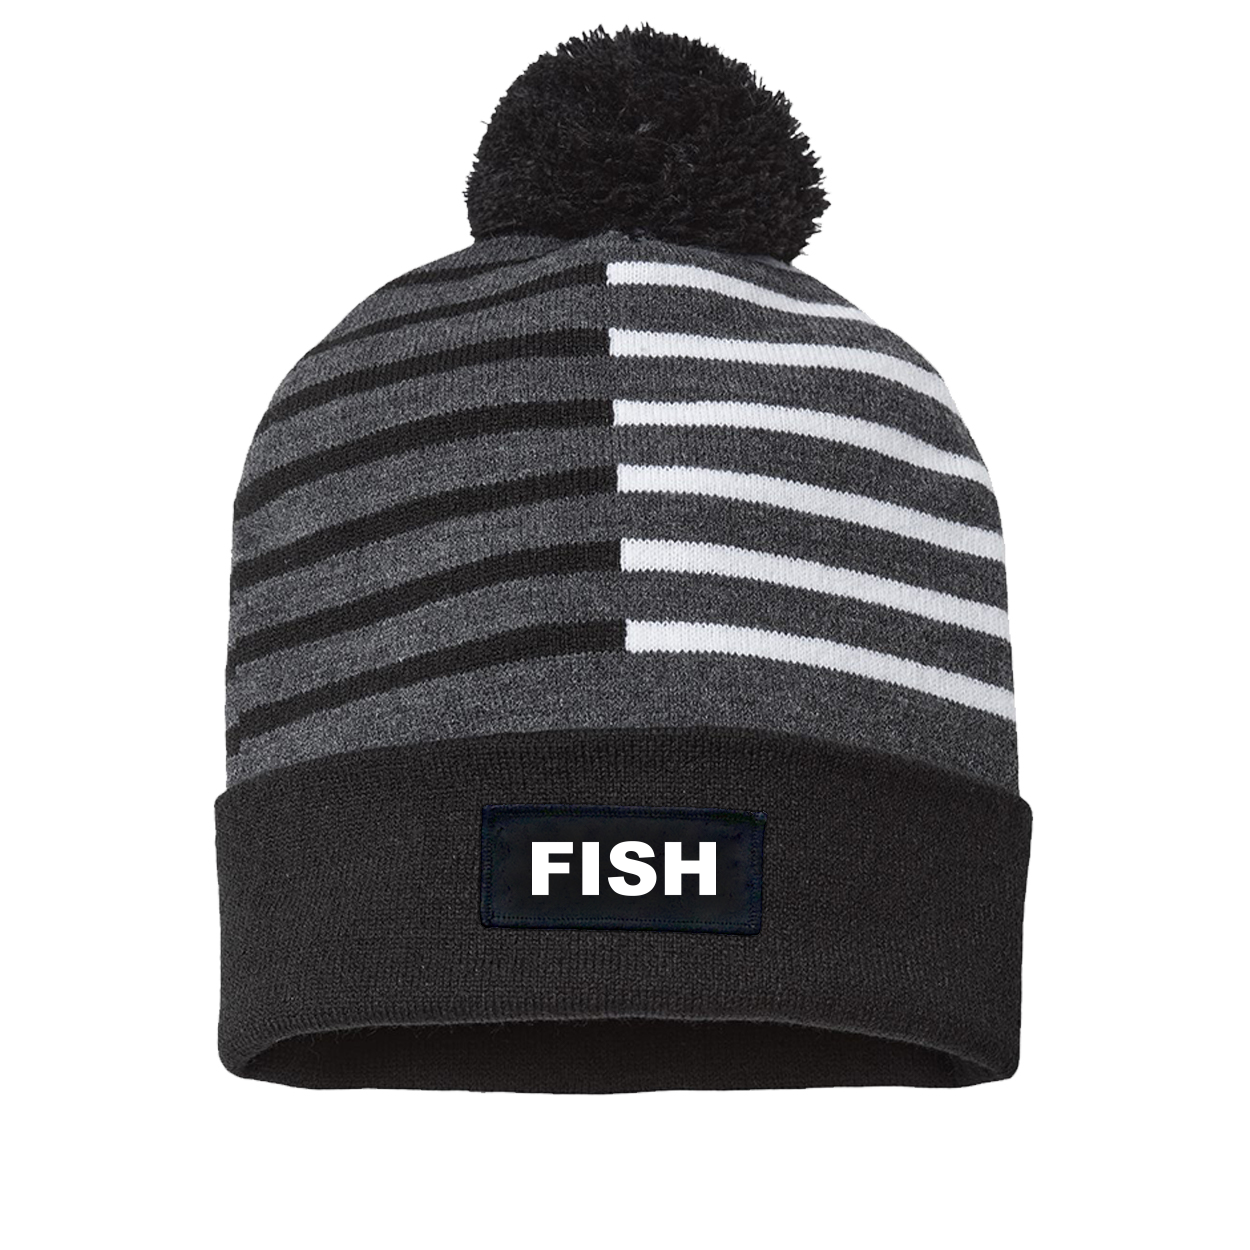 Fish Brand Logo Night Out Woven Patch Roll Up Pom Knit Beanie Half Color Black/White